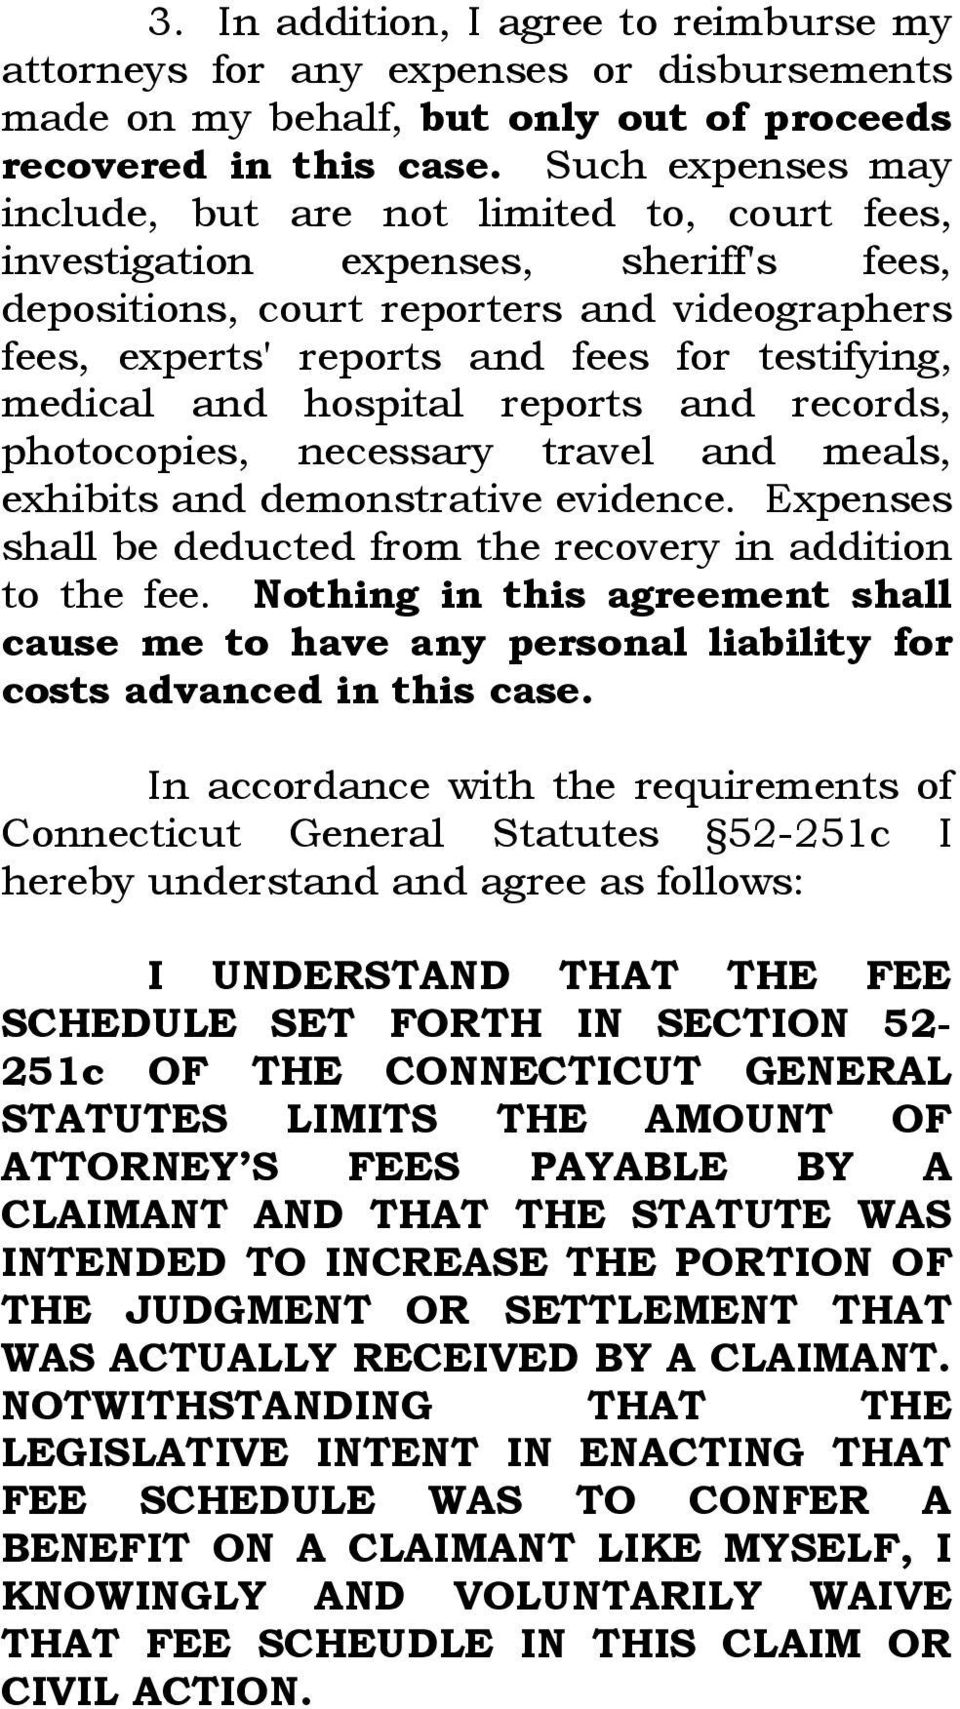 medical and hospital reports and records, photocopies, necessary travel and meals, exhibits and demonstrative evidence. Expenses shall be deducted from the recovery in addition to the fee.